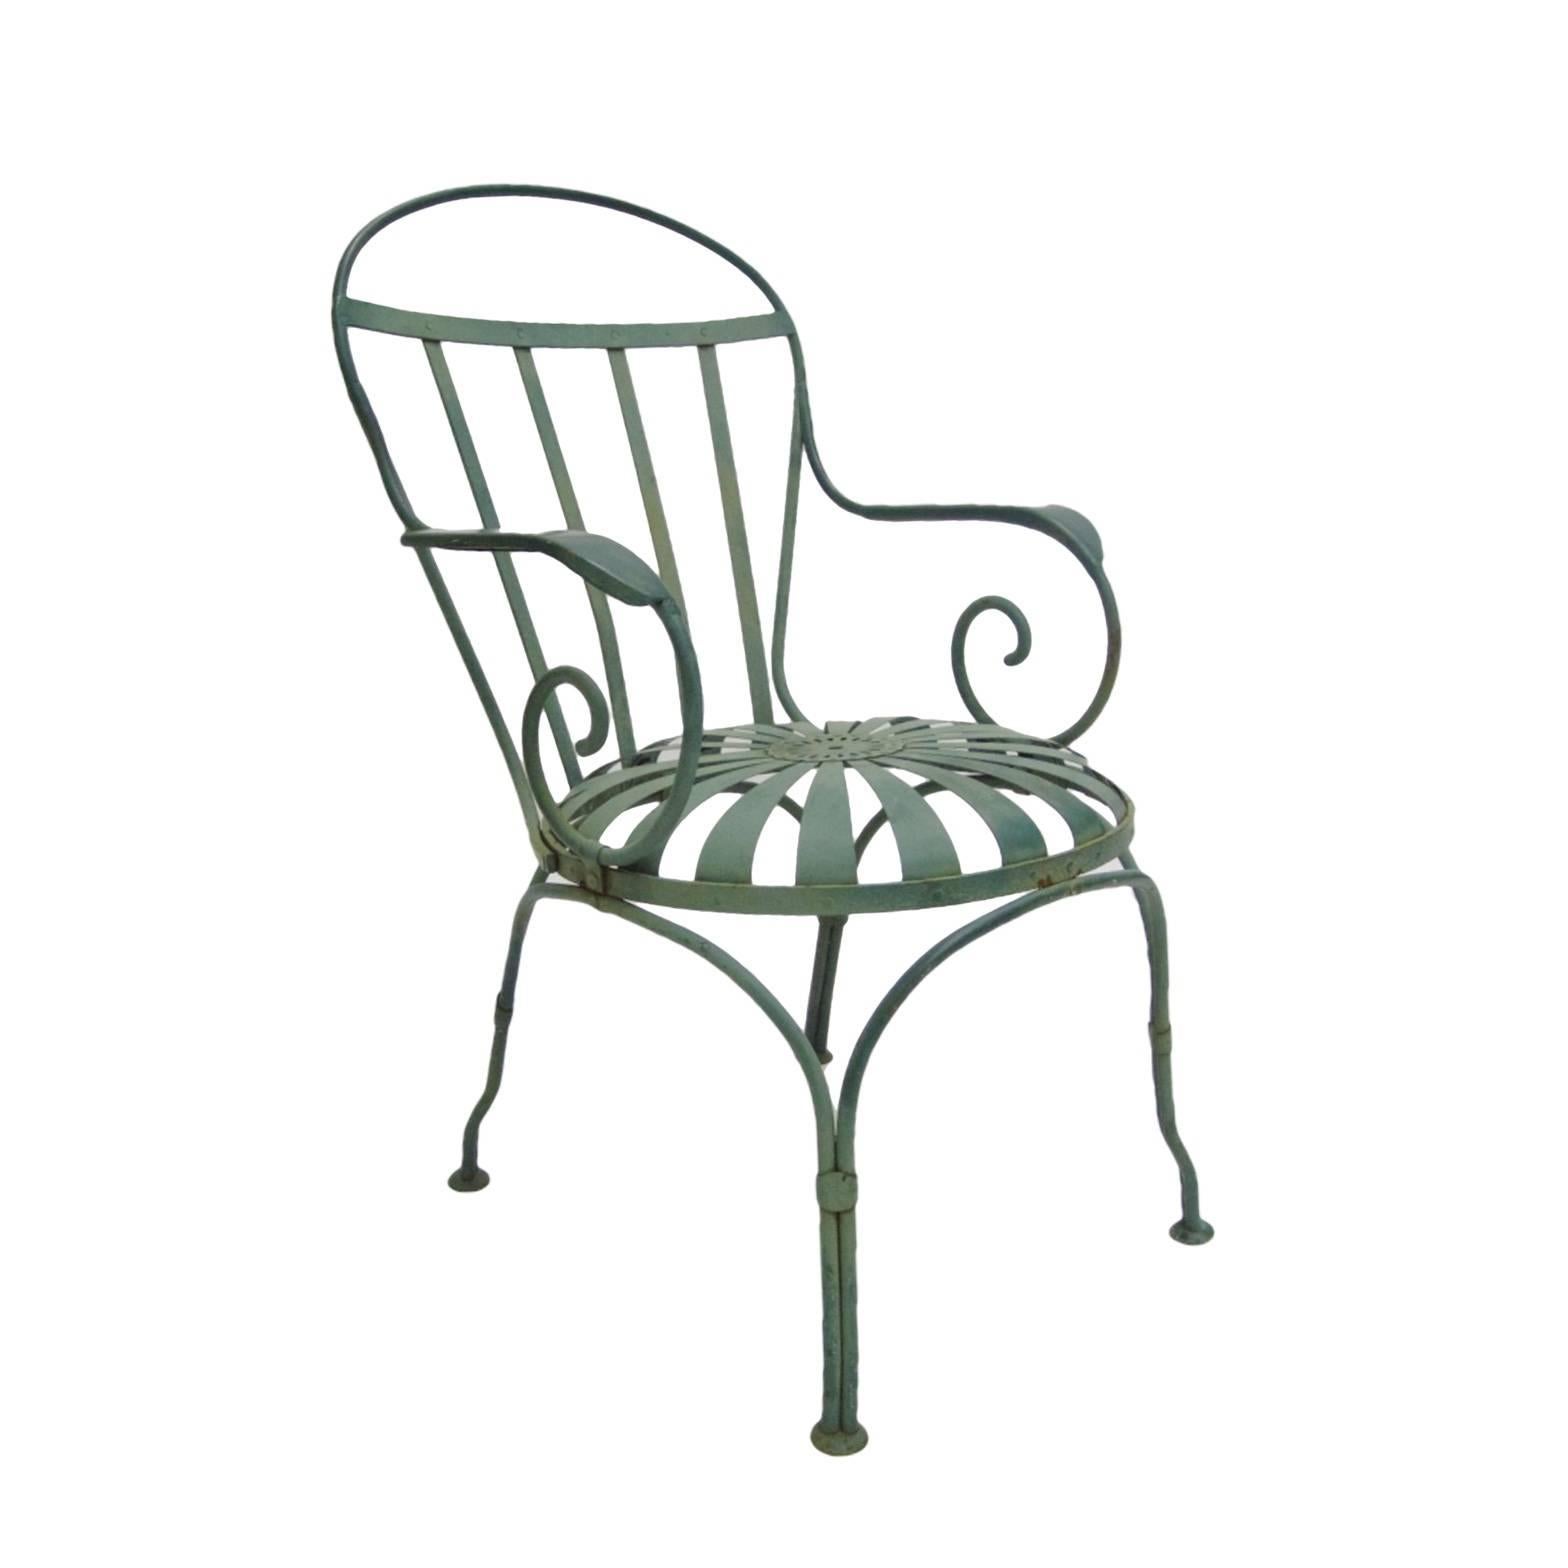 Painted Francois Carre Sunburst French Green Outdoor Garden or Patio Chairs